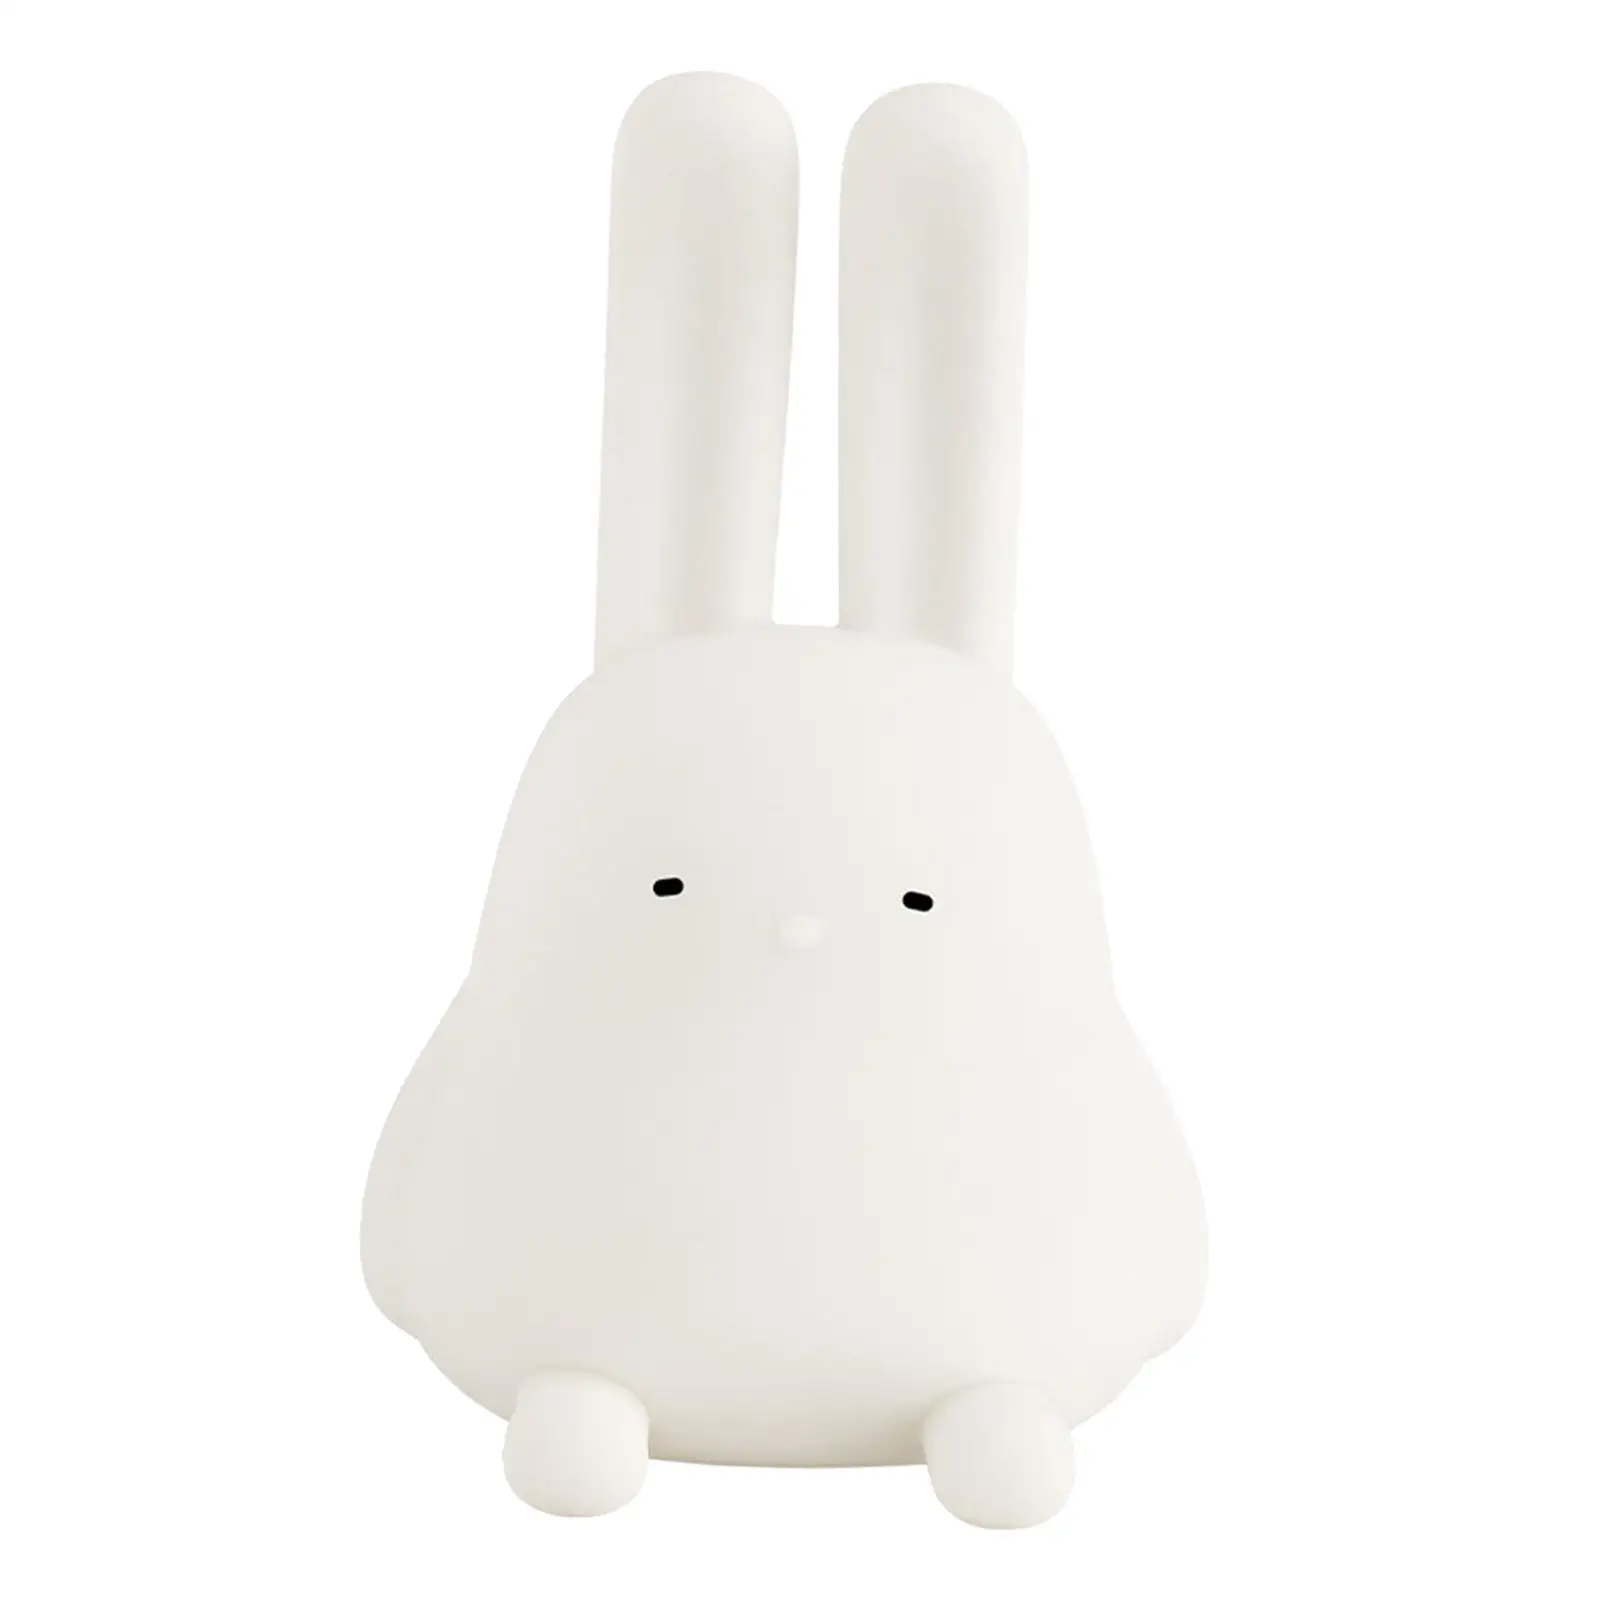 Rabbit Shape Silicone Night Light Lamp Phone Holder Children Gift 15/30 Minute Timing 2600K Warm White Dimmable LED for Sleeping